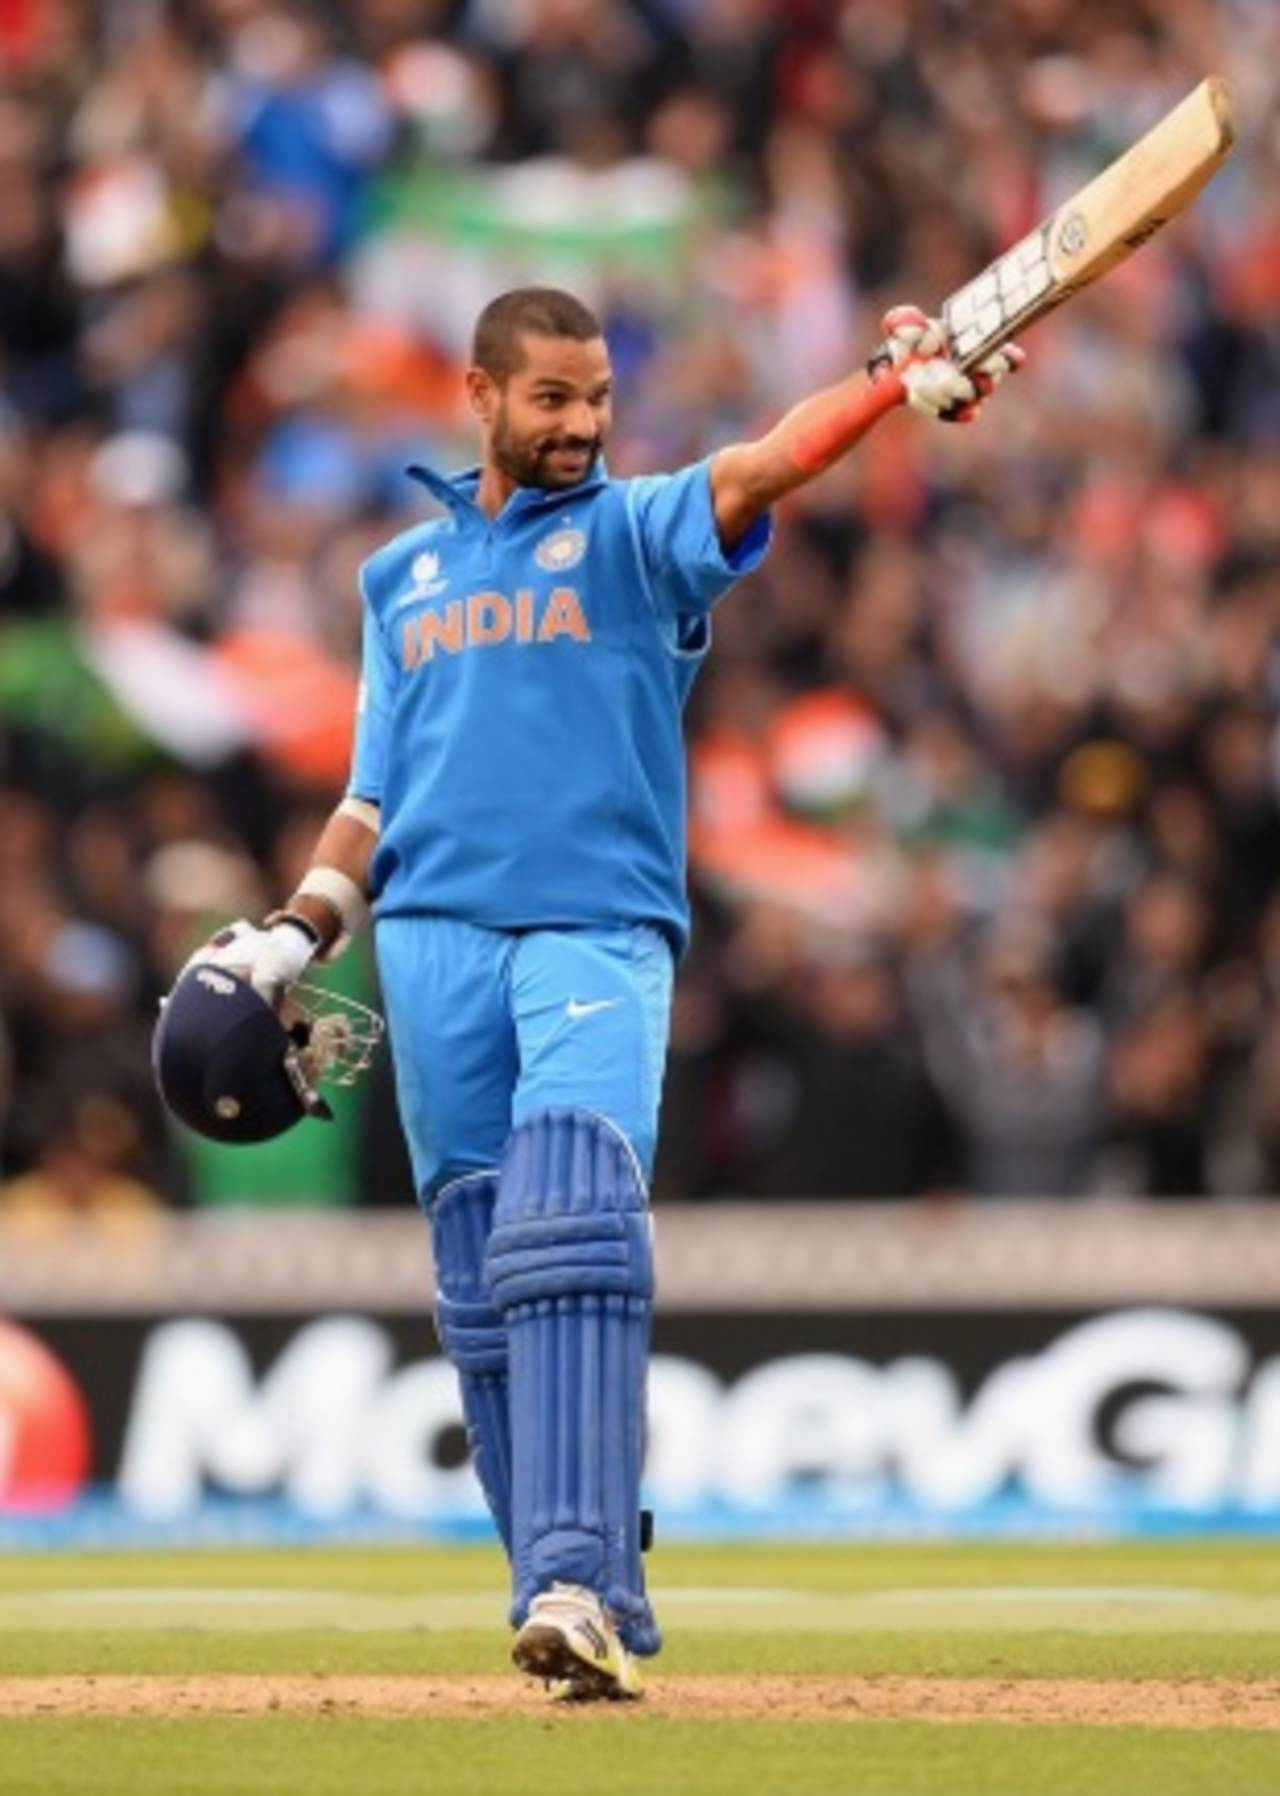 Shikhar Dhawan celebrates his second consecutive ODI century, India v West Indies, Champions Trophy, Group B, The Oval, June 11, 2013